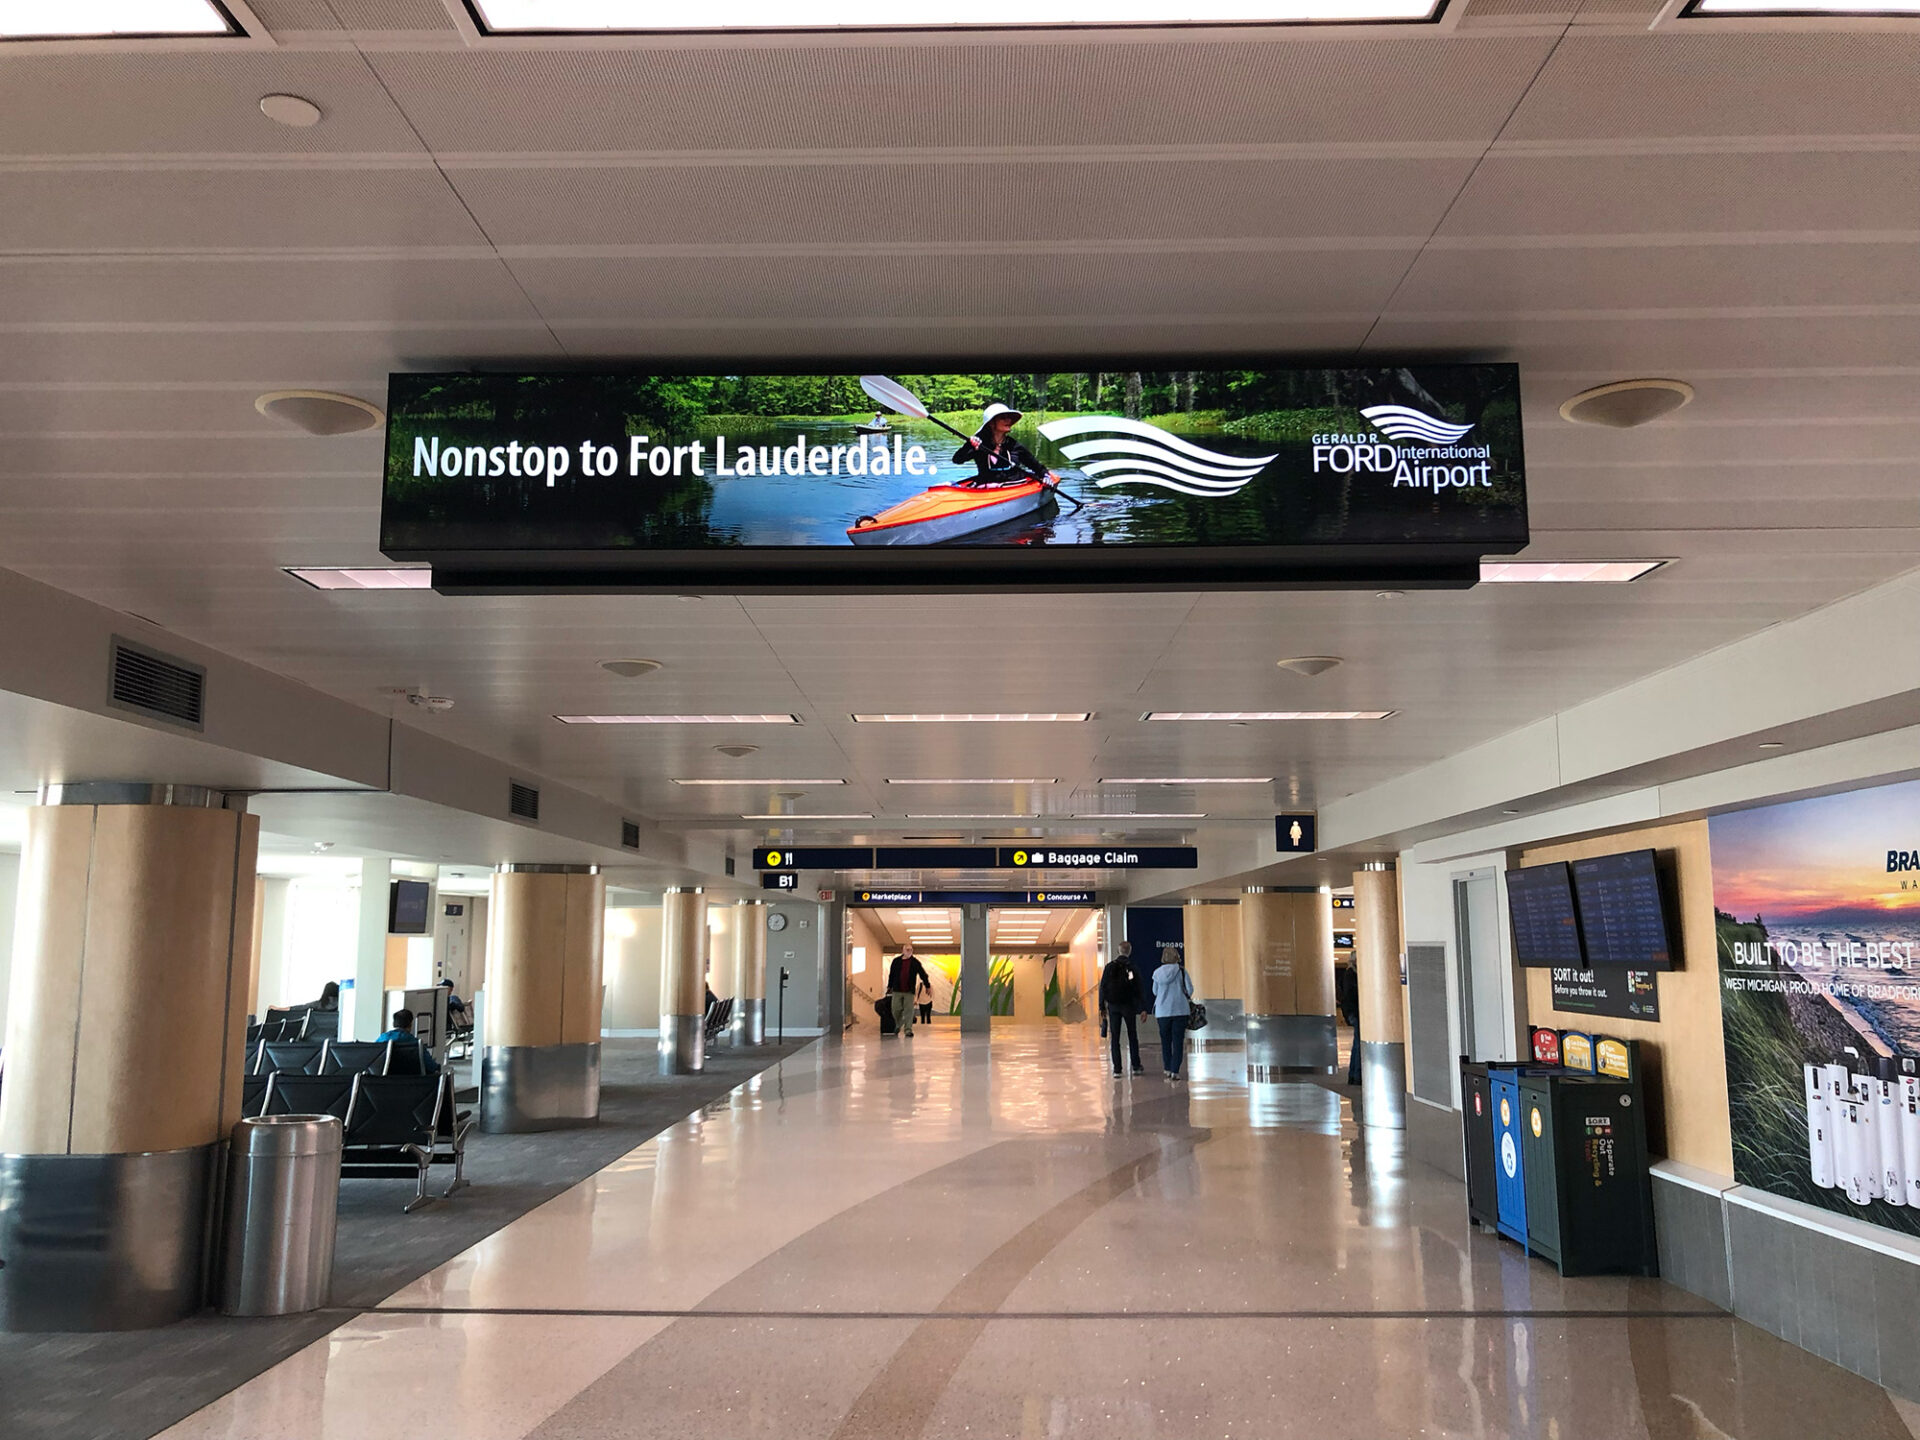 Digital out of home for Gerald R. Ford International Airport. Nonstop to Fort Lauderdale